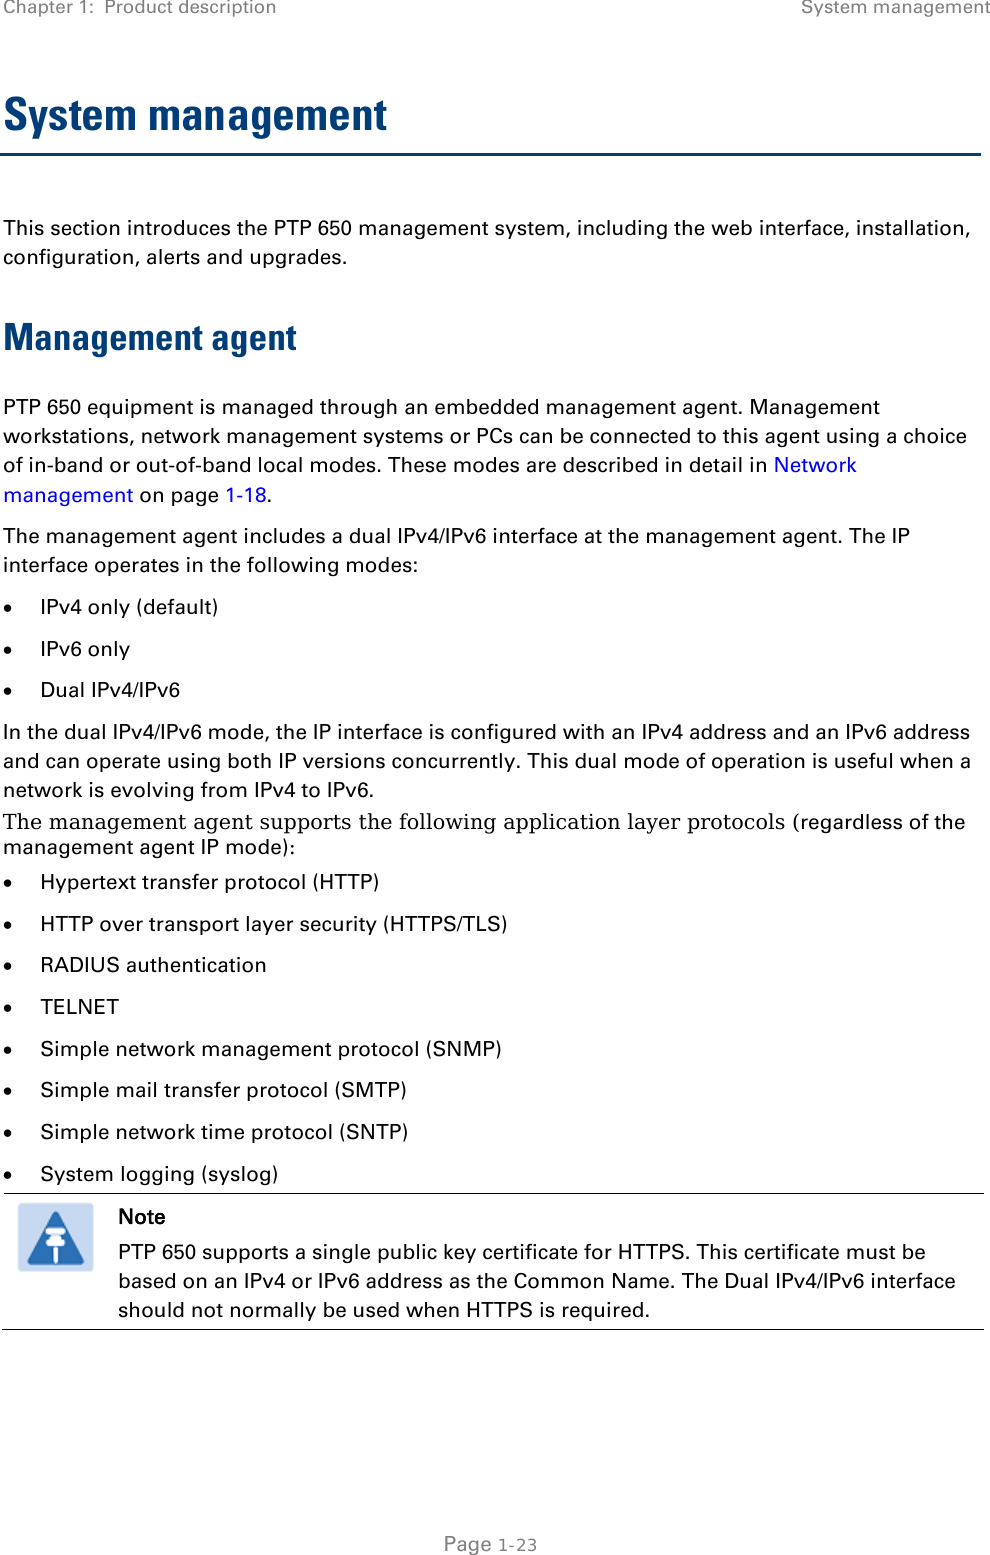 Chapter 1:  Product description System management  System management  This section introduces the PTP 650 management system, including the web interface, installation, configuration, alerts and upgrades. Management agent PTP 650 equipment is managed through an embedded management agent. Management workstations, network management systems or PCs can be connected to this agent using a choice of in-band or out-of-band local modes. These modes are described in detail in Network management on page 1-18. The management agent includes a dual IPv4/IPv6 interface at the management agent. The IP interface operates in the following modes: • IPv4 only (default) • IPv6 only • Dual IPv4/IPv6 In the dual IPv4/IPv6 mode, the IP interface is configured with an IPv4 address and an IPv6 address and can operate using both IP versions concurrently. This dual mode of operation is useful when a network is evolving from IPv4 to IPv6. The management agent supports the following application layer protocols (regardless of the management agent IP mode): • Hypertext transfer protocol (HTTP) • HTTP over transport layer security (HTTPS/TLS) • RADIUS authentication • TELNET • Simple network management protocol (SNMP) • Simple mail transfer protocol (SMTP) • Simple network time protocol (SNTP) • System logging (syslog)  Note PTP 650 supports a single public key certificate for HTTPS. This certificate must be based on an IPv4 or IPv6 address as the Common Name. The Dual IPv4/IPv6 interface should not normally be used when HTTPS is required.   Page 1-23 